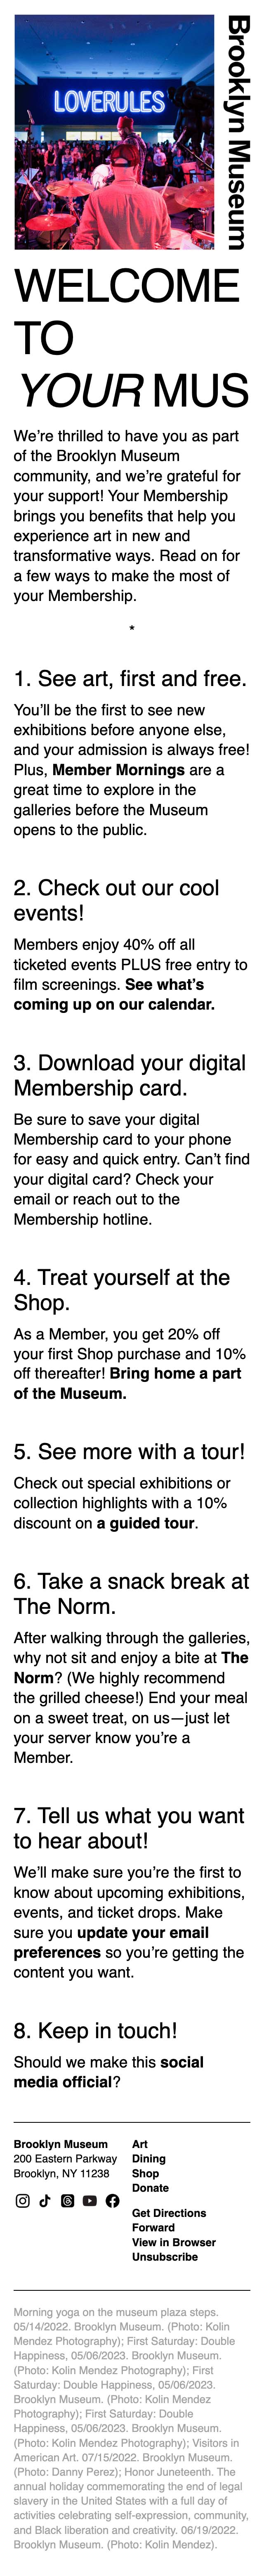 Make the most of your Brooklyn Museum Membership! ✨ - mobile view